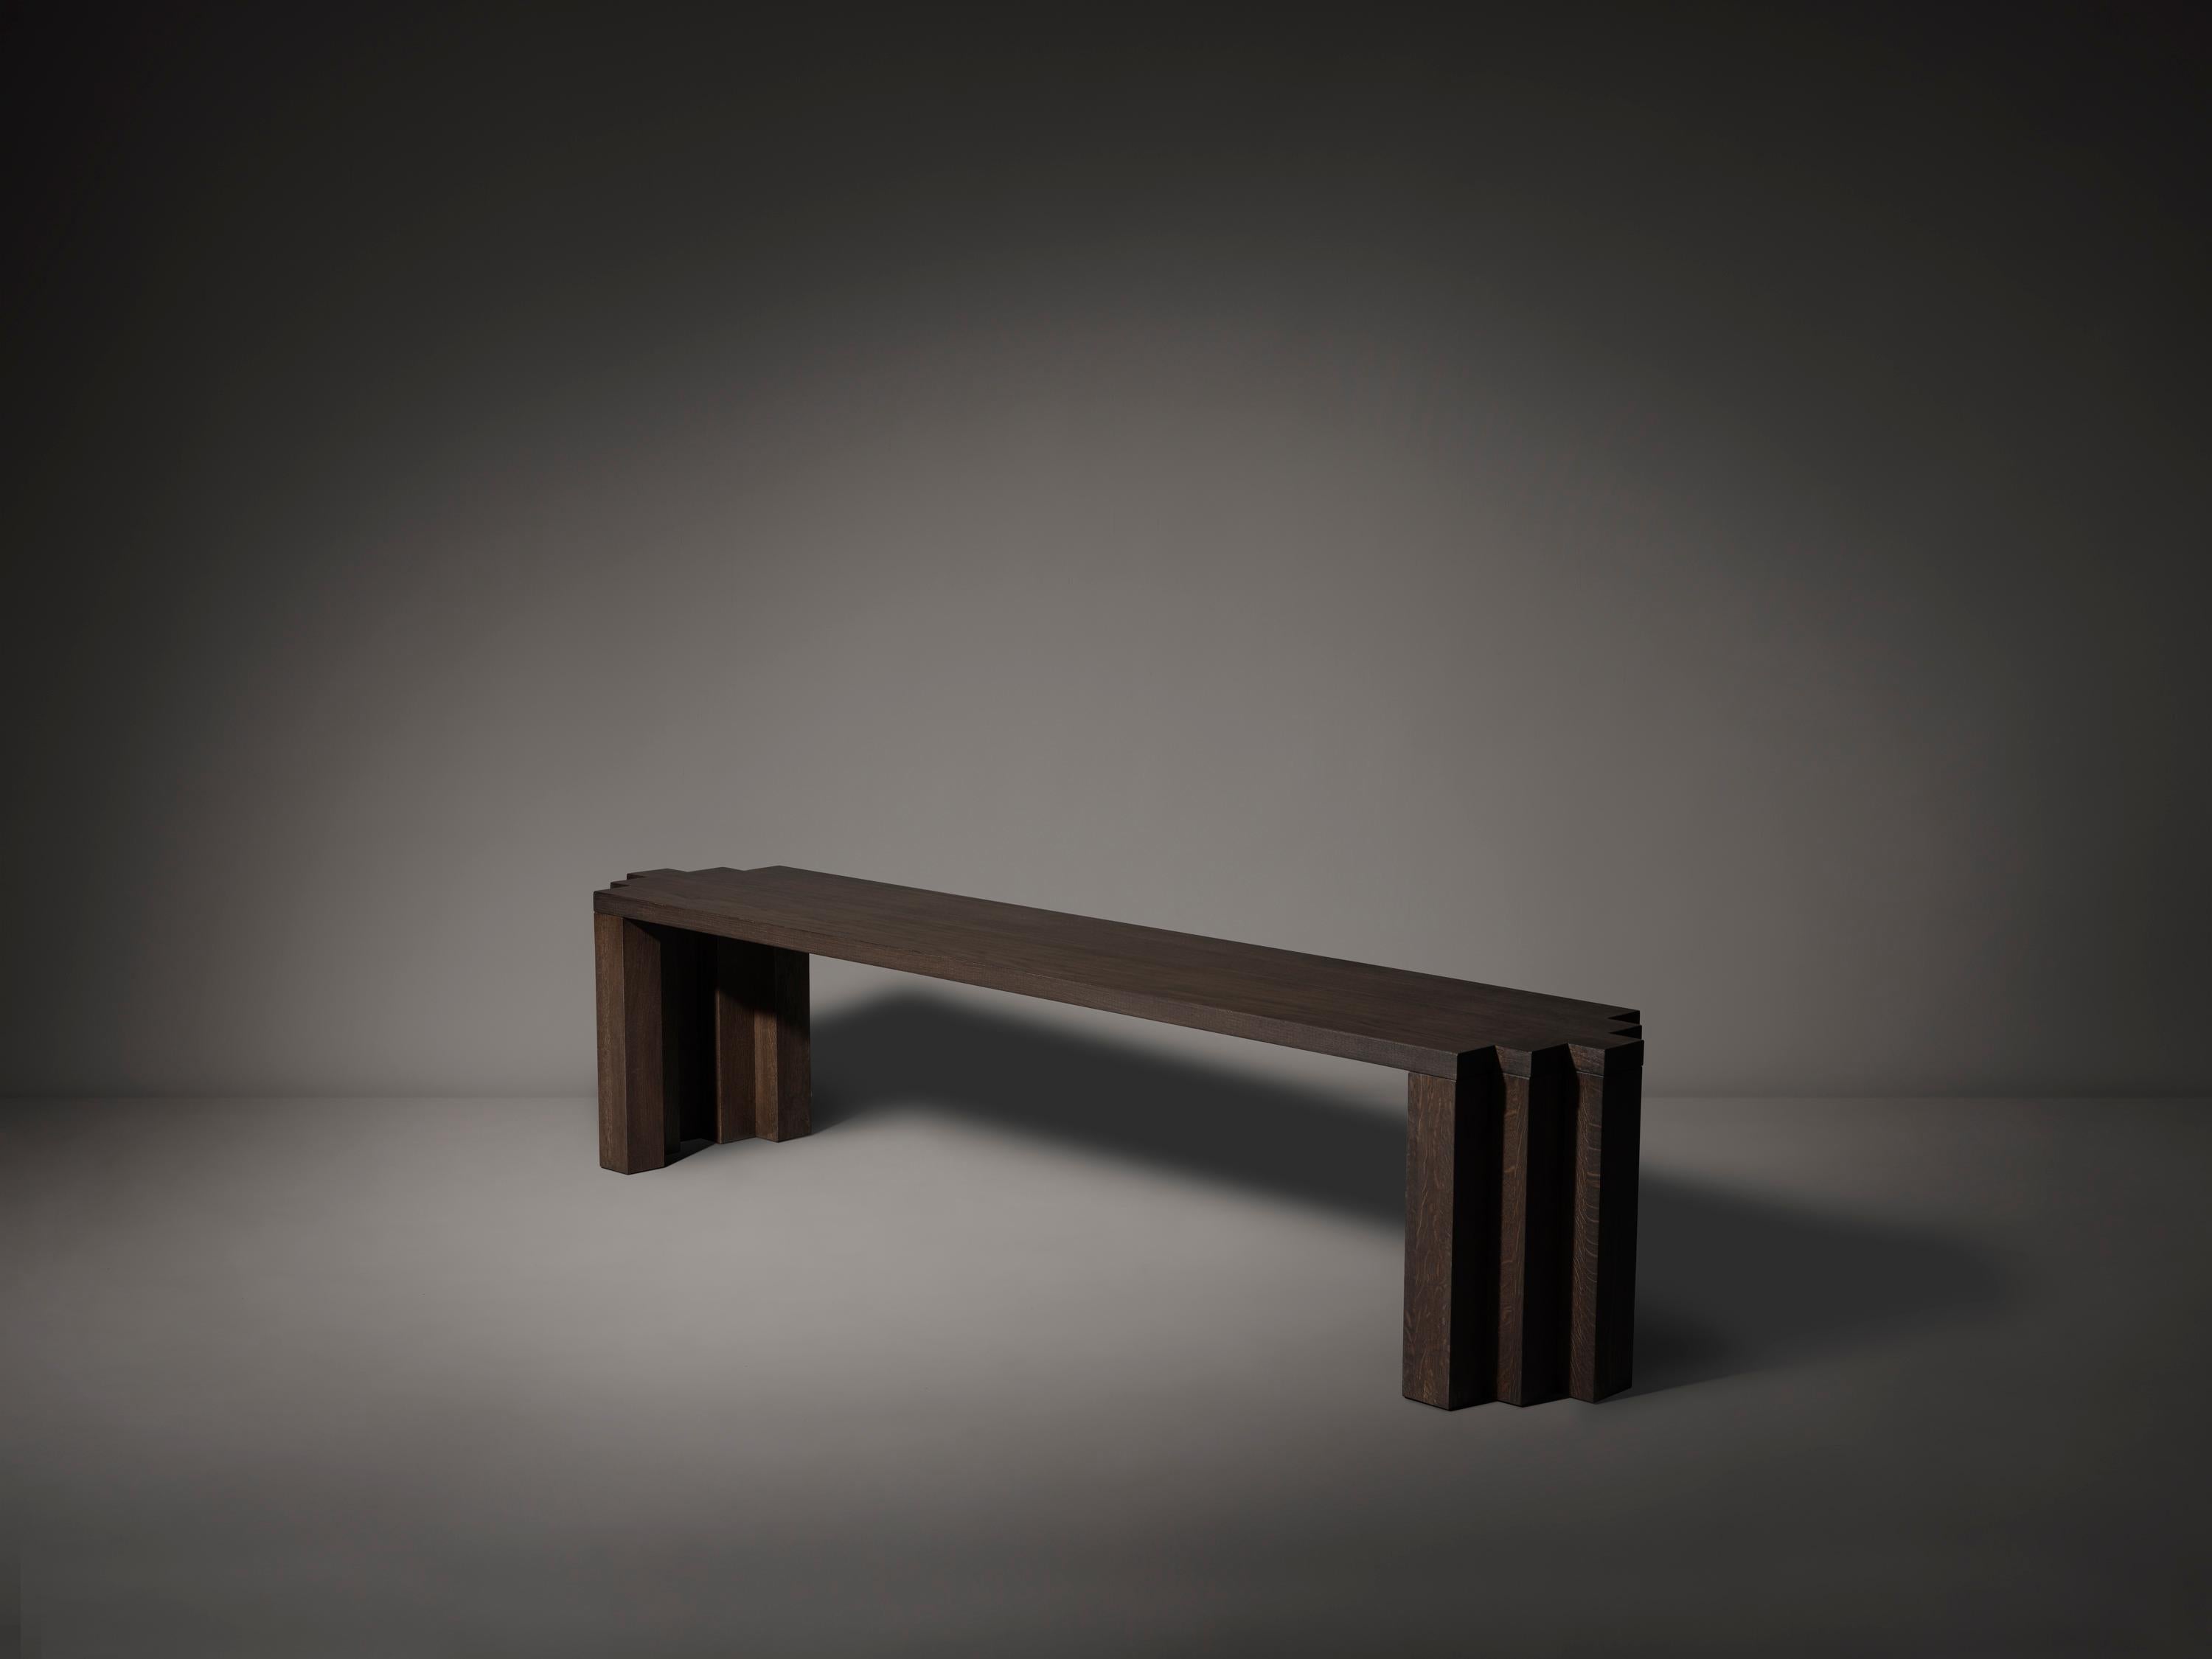 The Cadence Bench takes cues from Brutalism and Amsterdam School architecture and is made out of solid hardwood. The bench is designed to match the Cadence dining table but is also available as a separate product. 

Mokko is an Amsterdam based